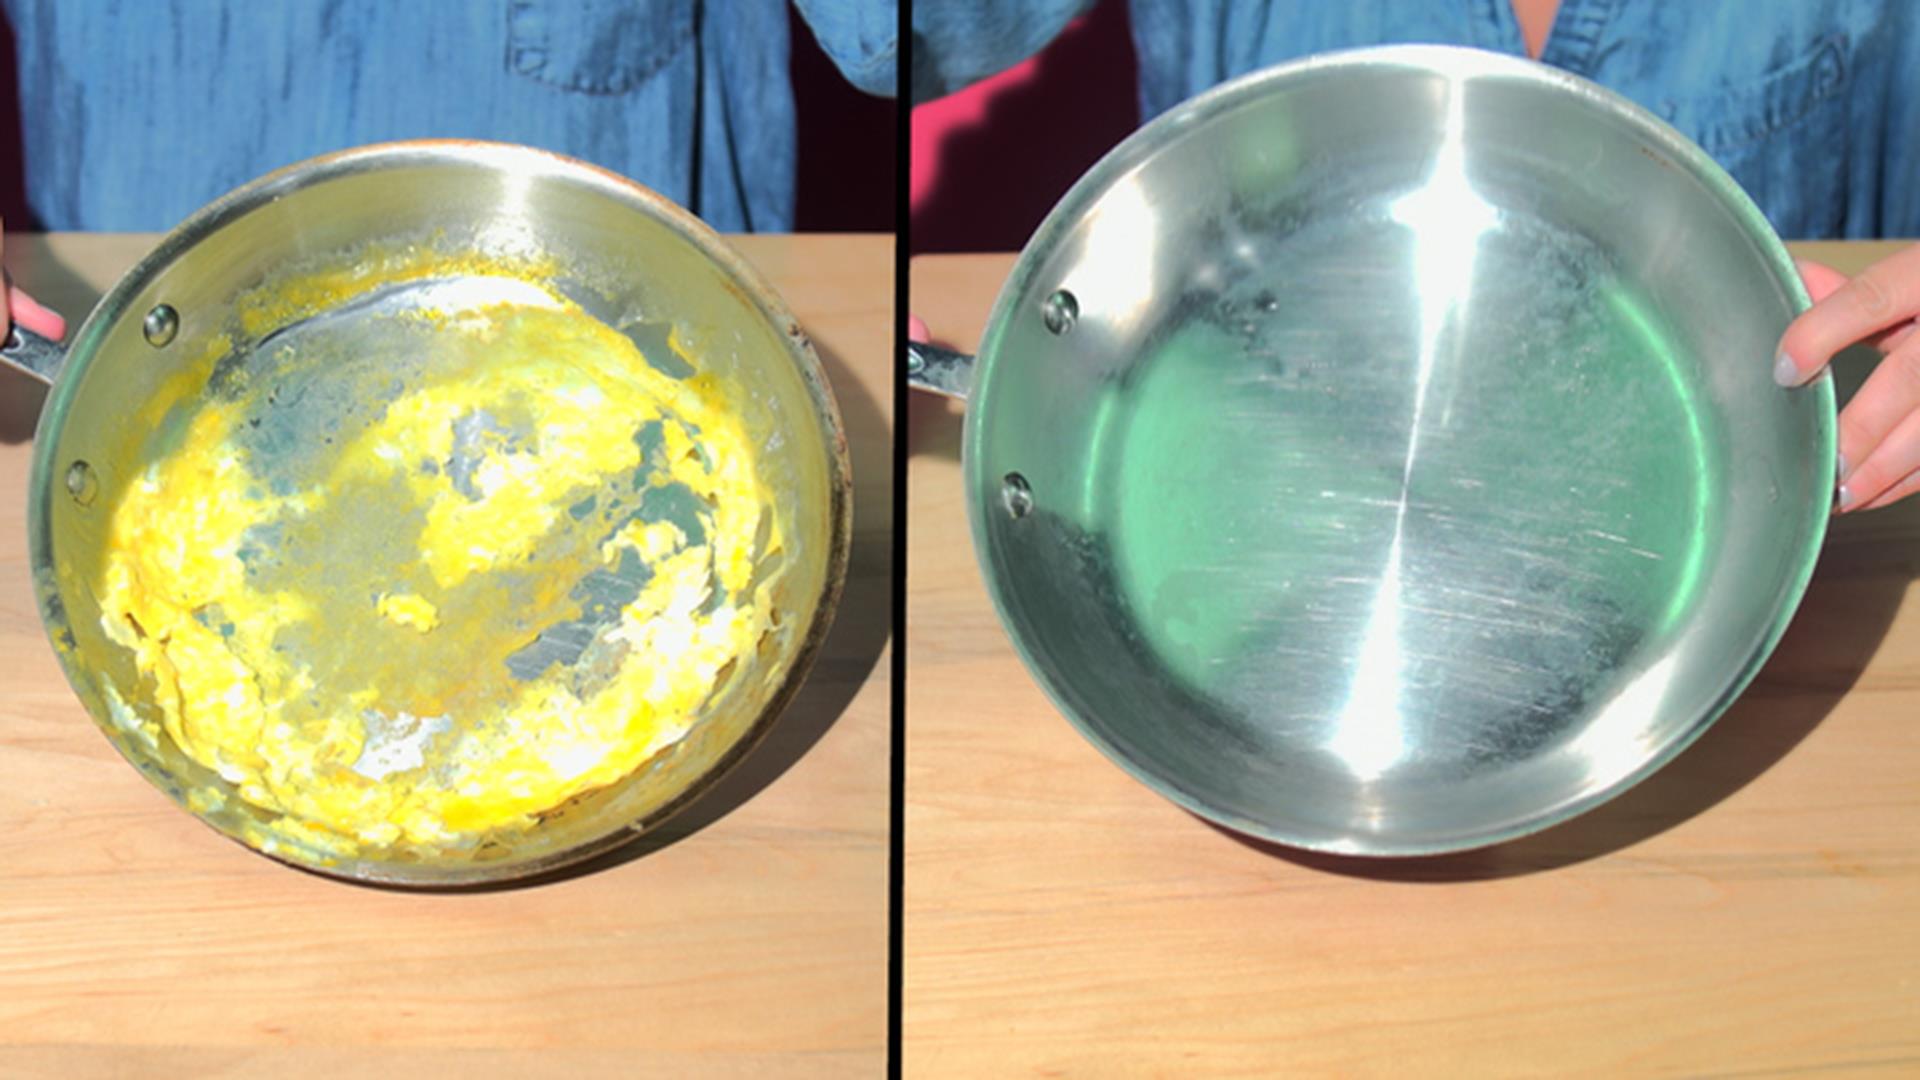 A simple cleaning hack for impossible-to-scrub pans